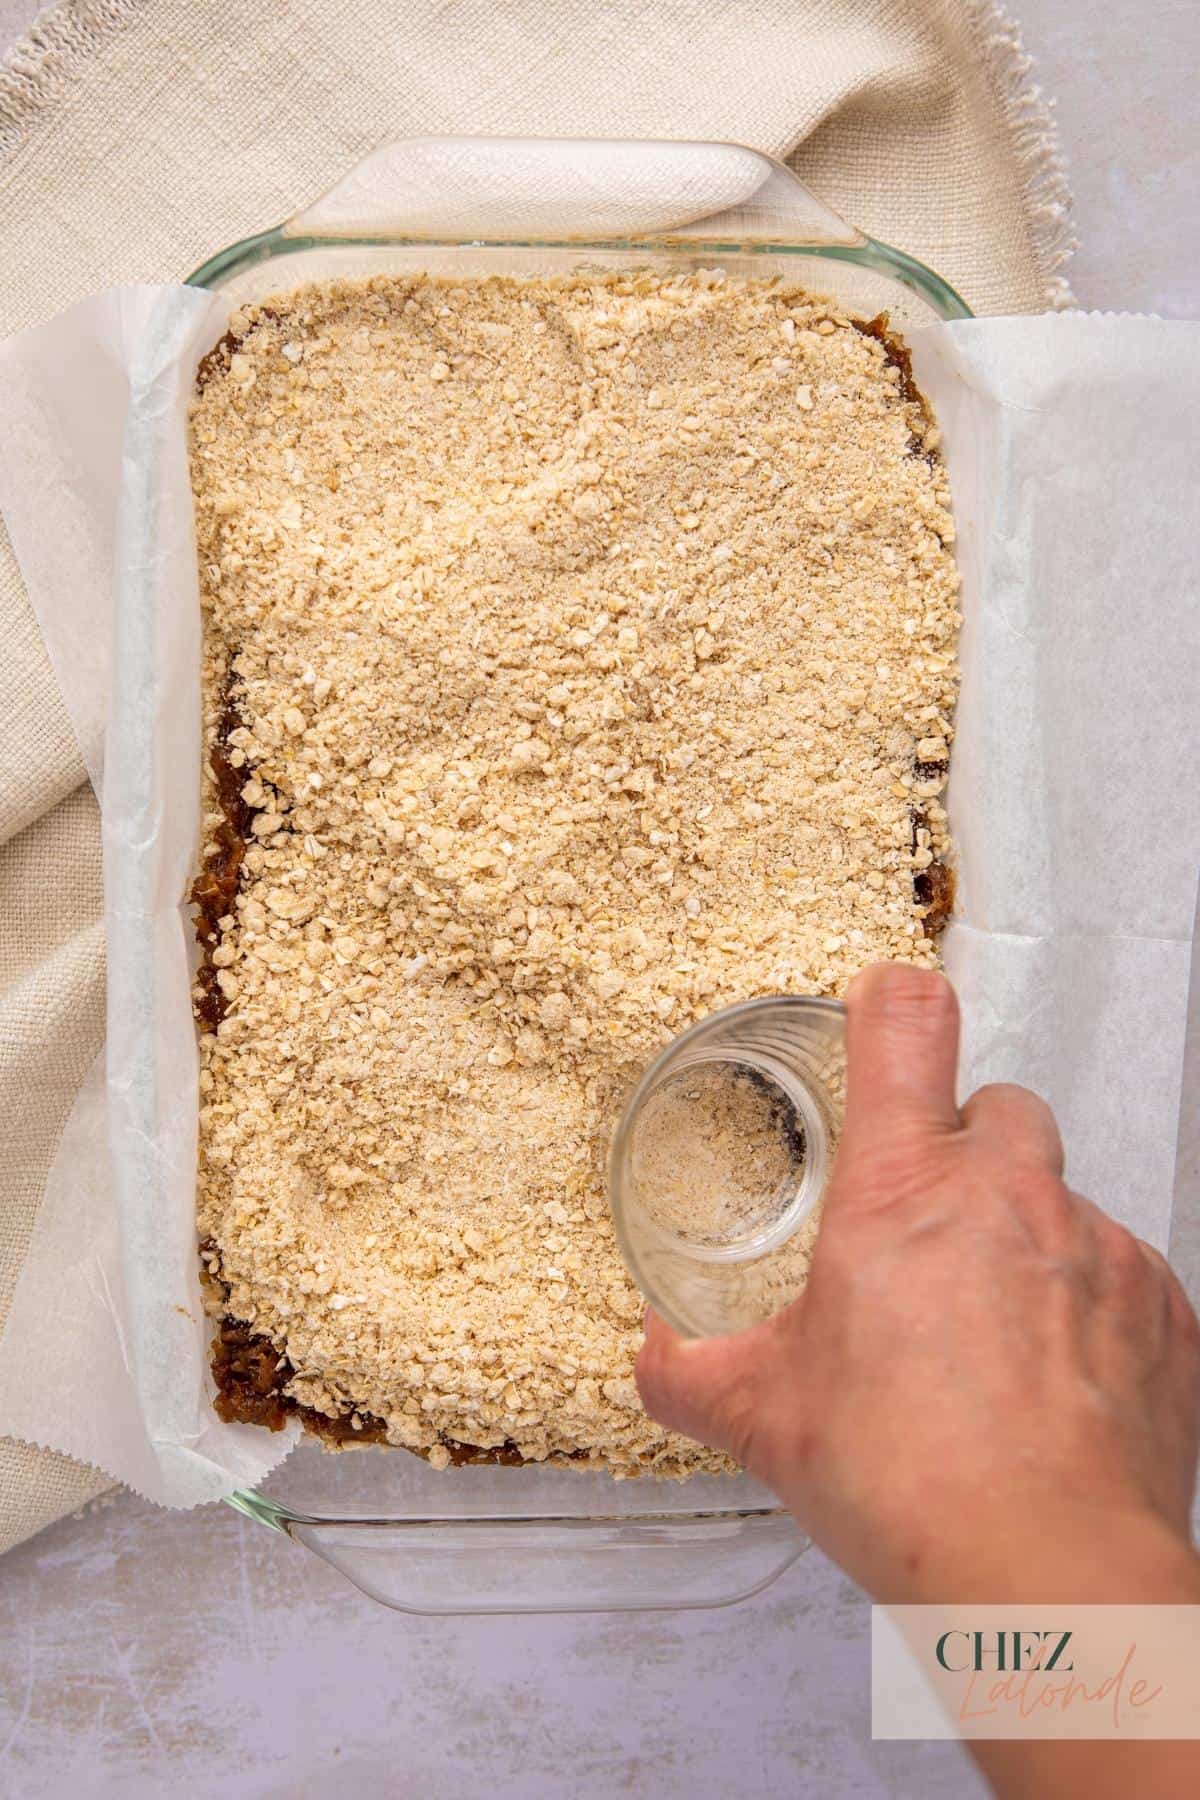 A baking dish with layers of date filling and oatmeal topping. A hand is using a glass bottom to press down the toppings.